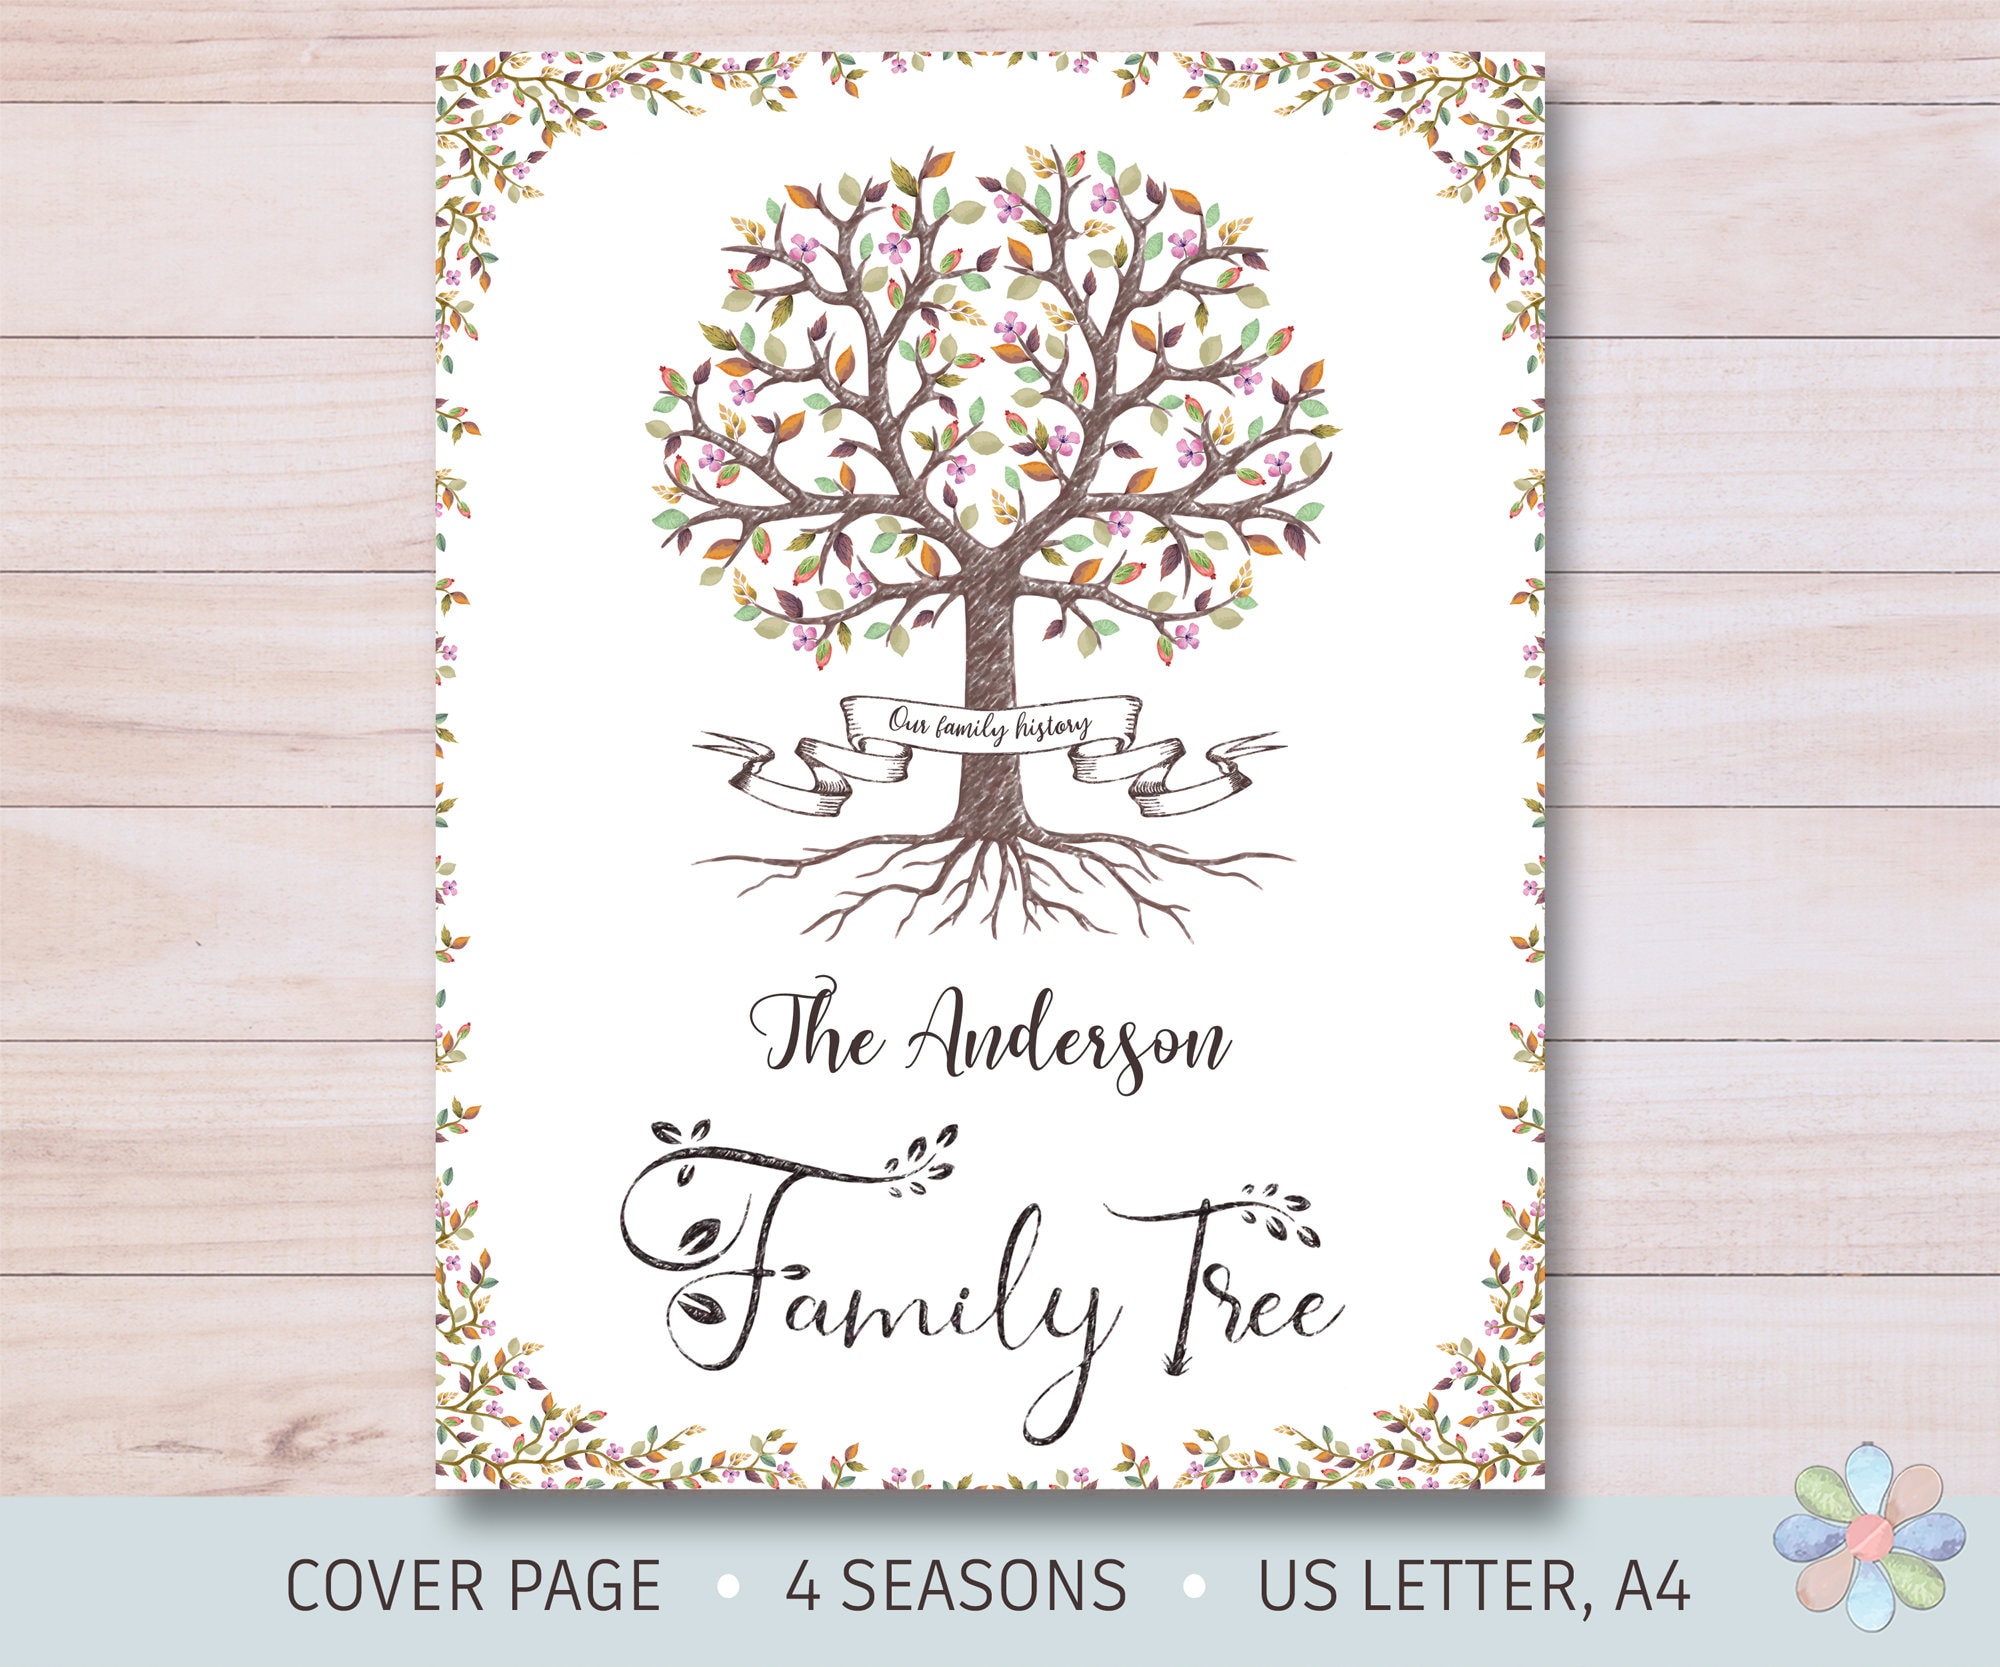 Noarlalf The Notebook Family Family Personal Into Memories to and Tree  Write Ancestors鈥?Genealogy Notebook-Handwritten Office & Stationery Spiral